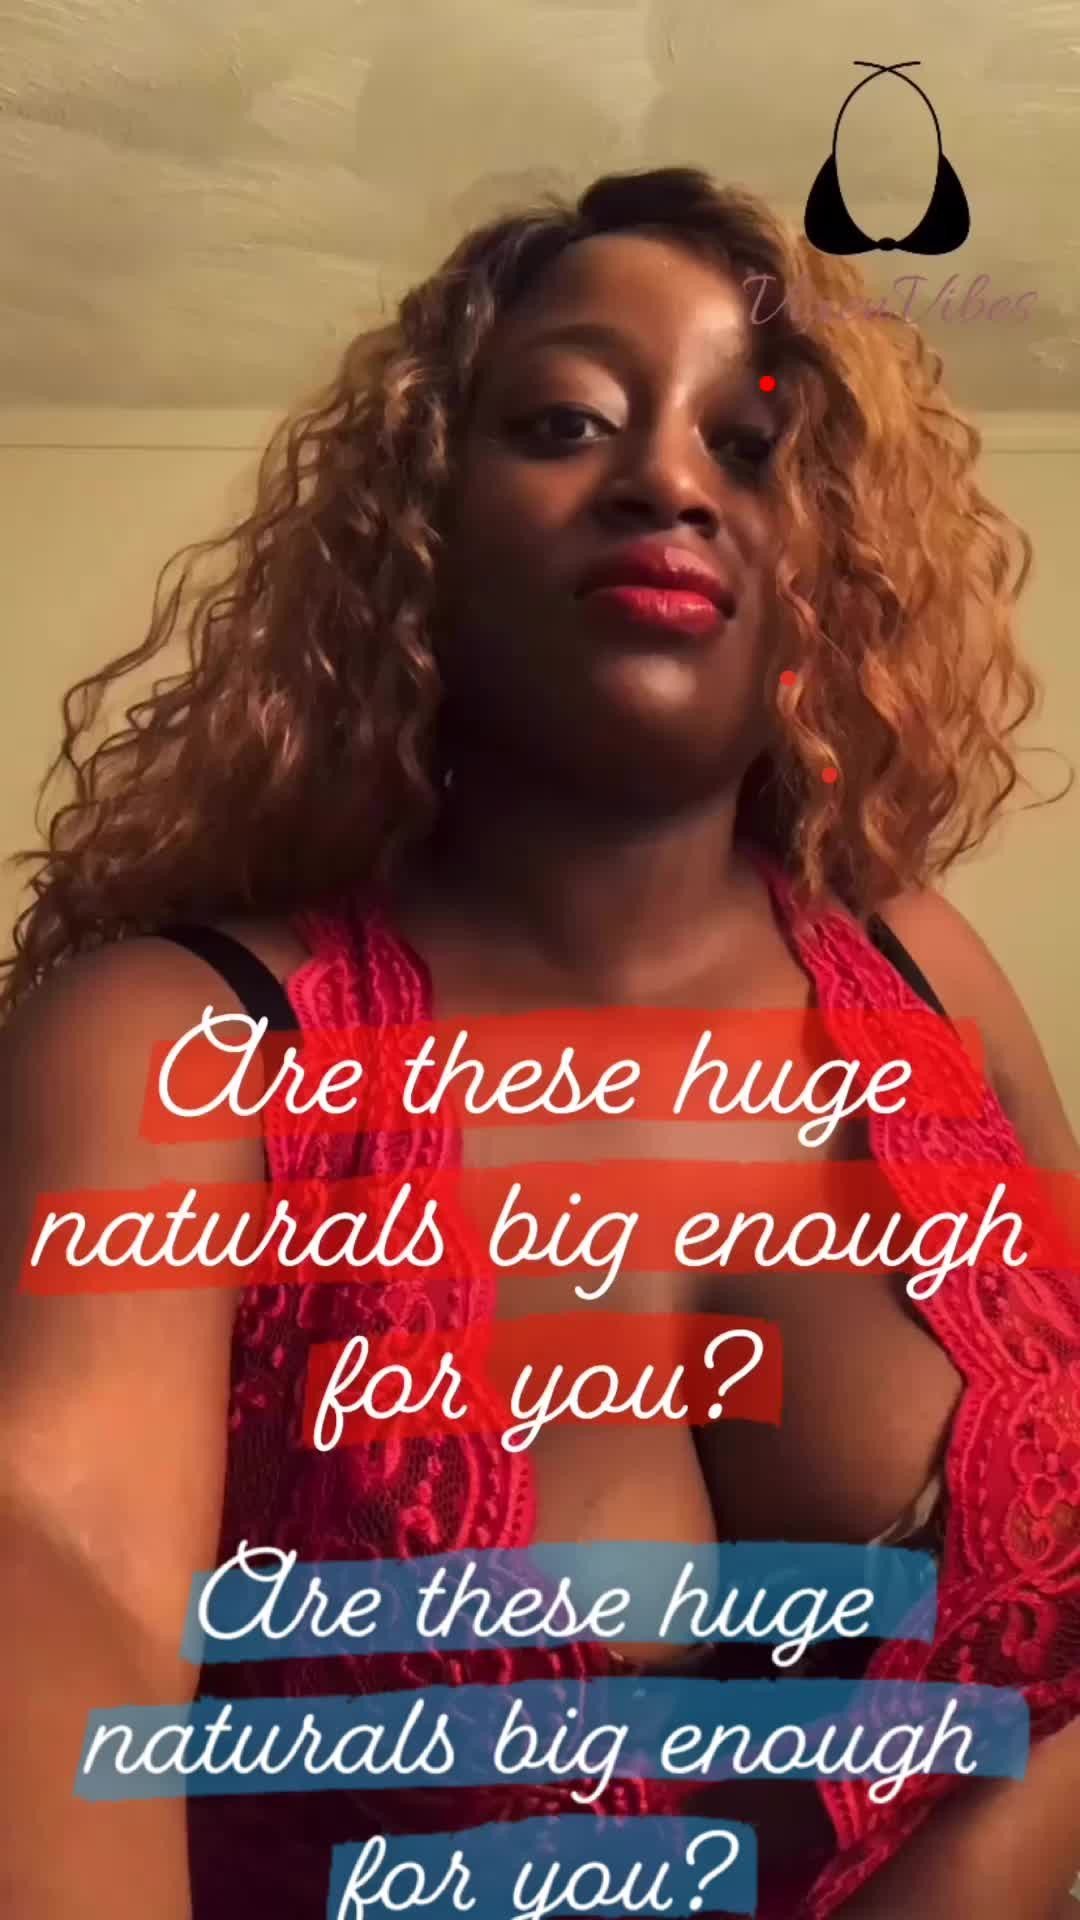 Are they big enough for you?